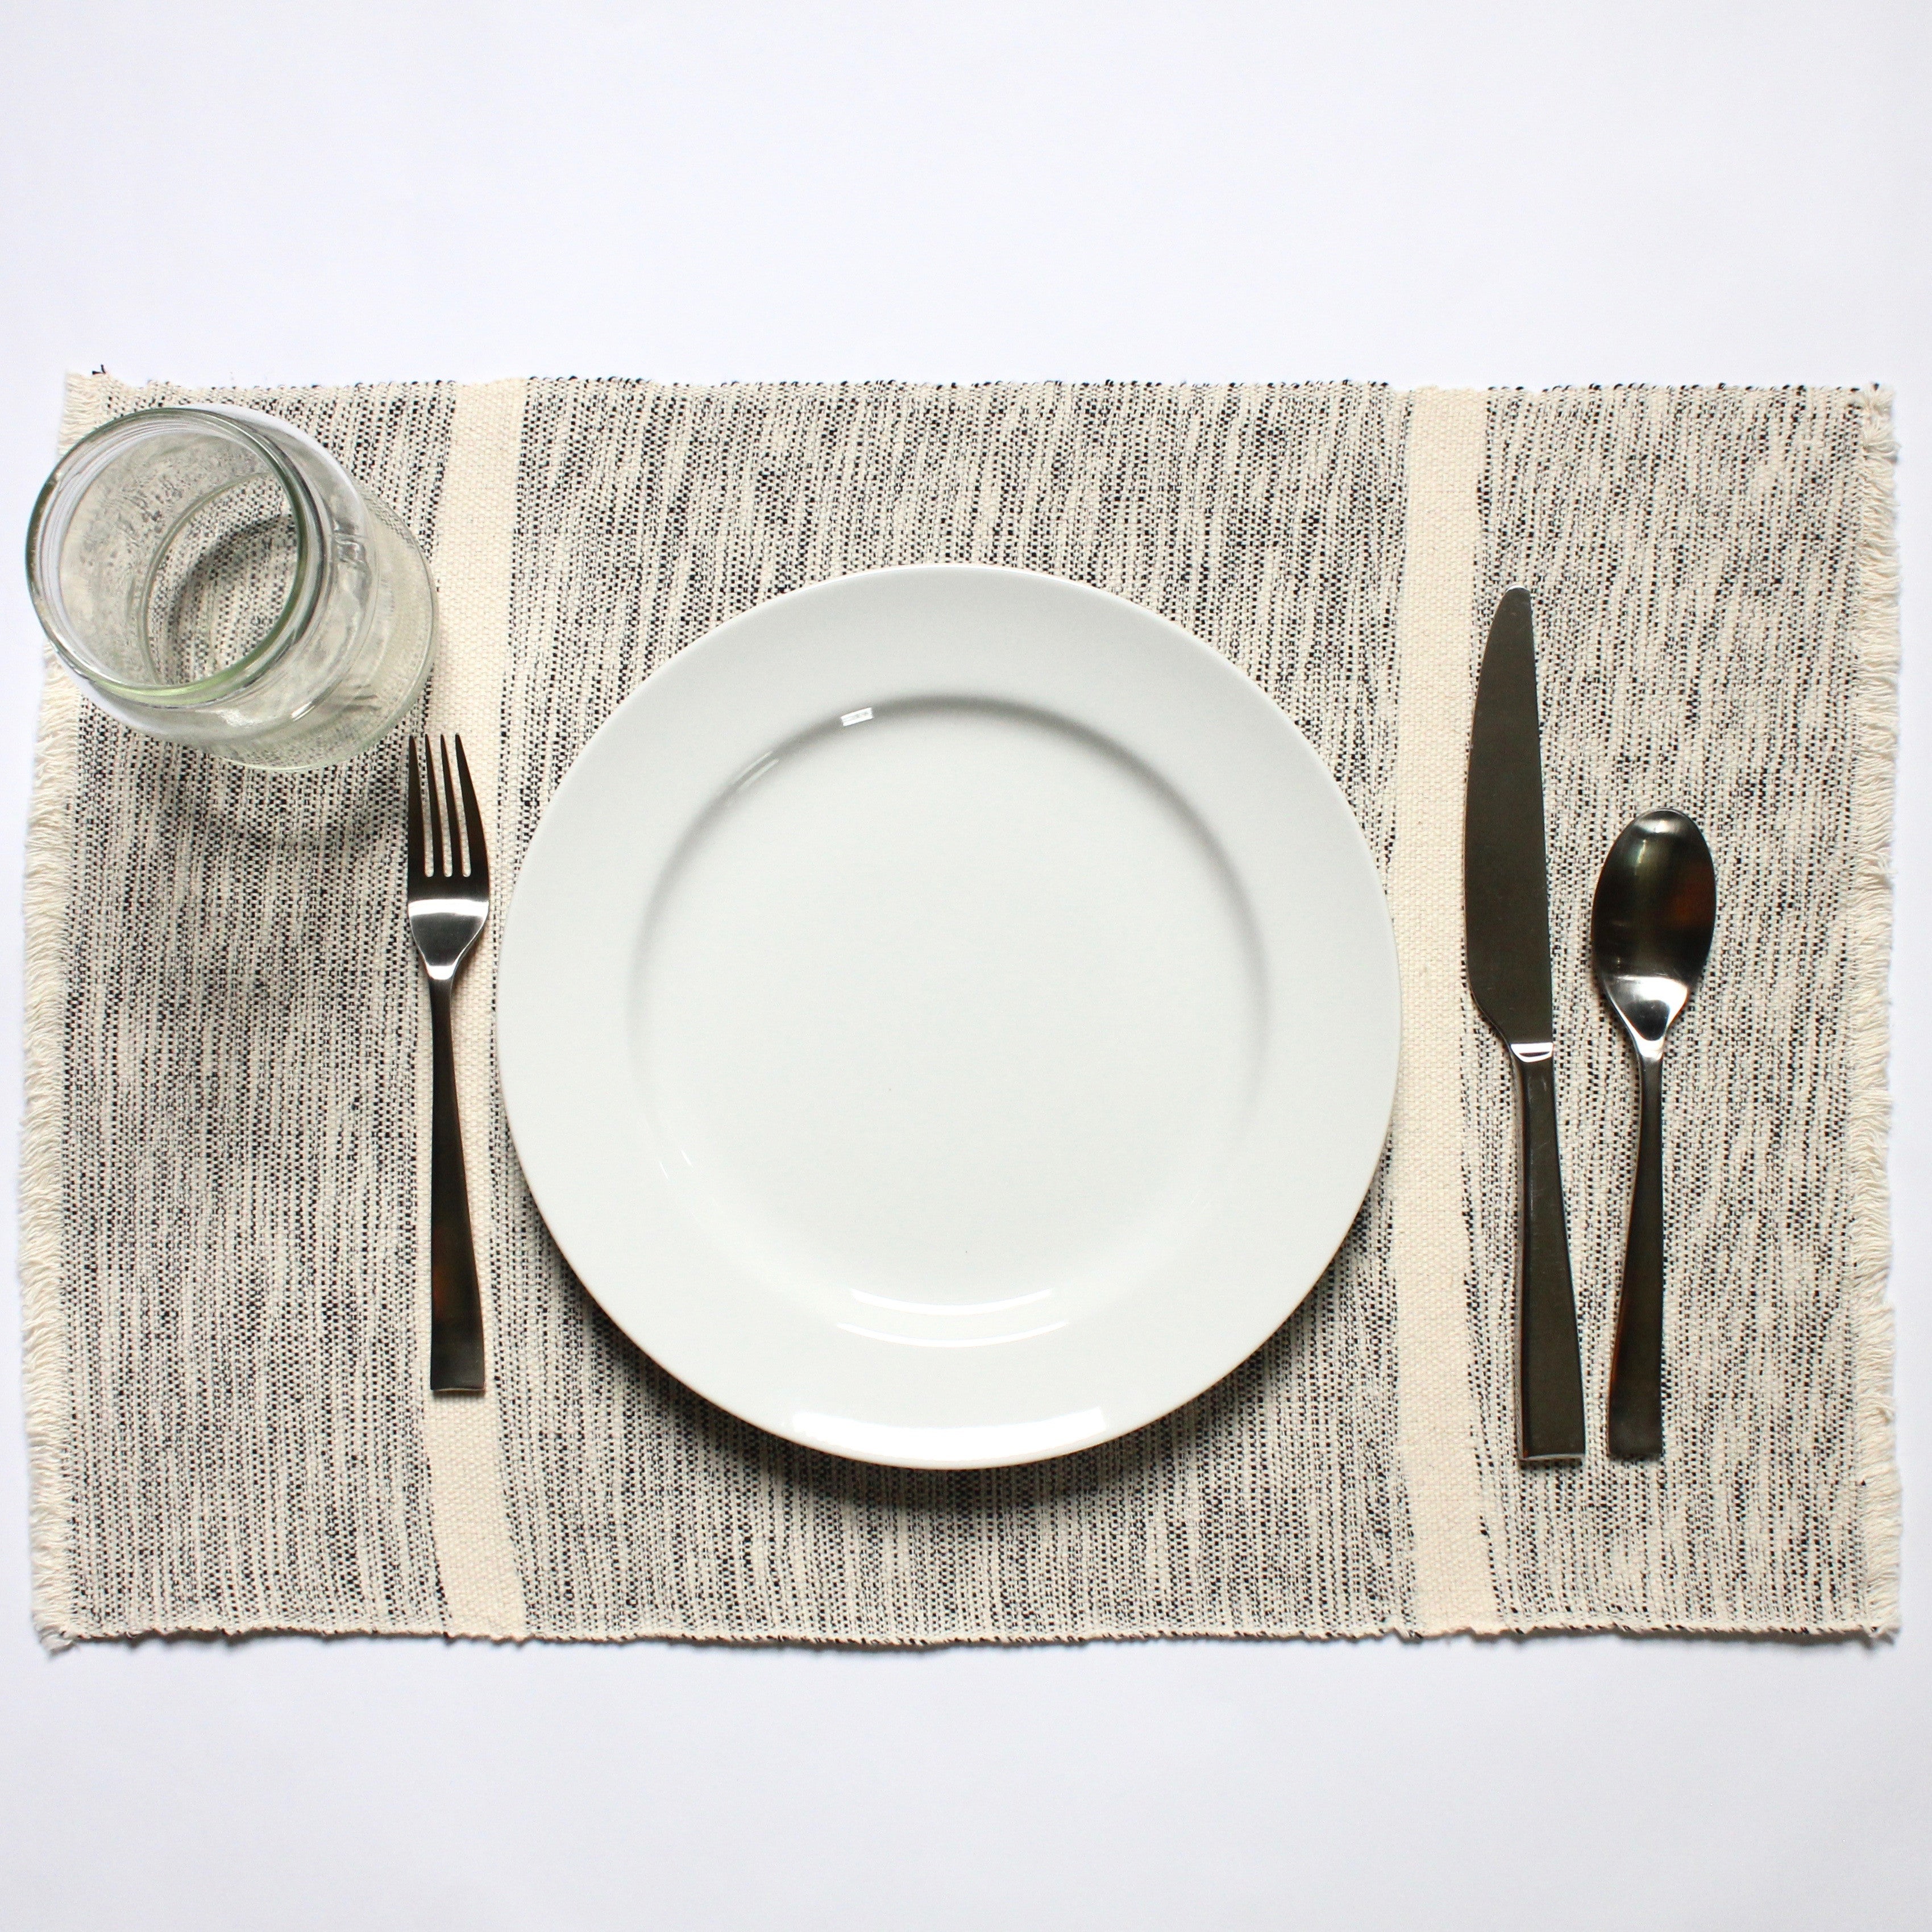 INDI mixed grey and natural striped placemats woven by hand with 100% ecologically dyed cotton by Living Threads Co.